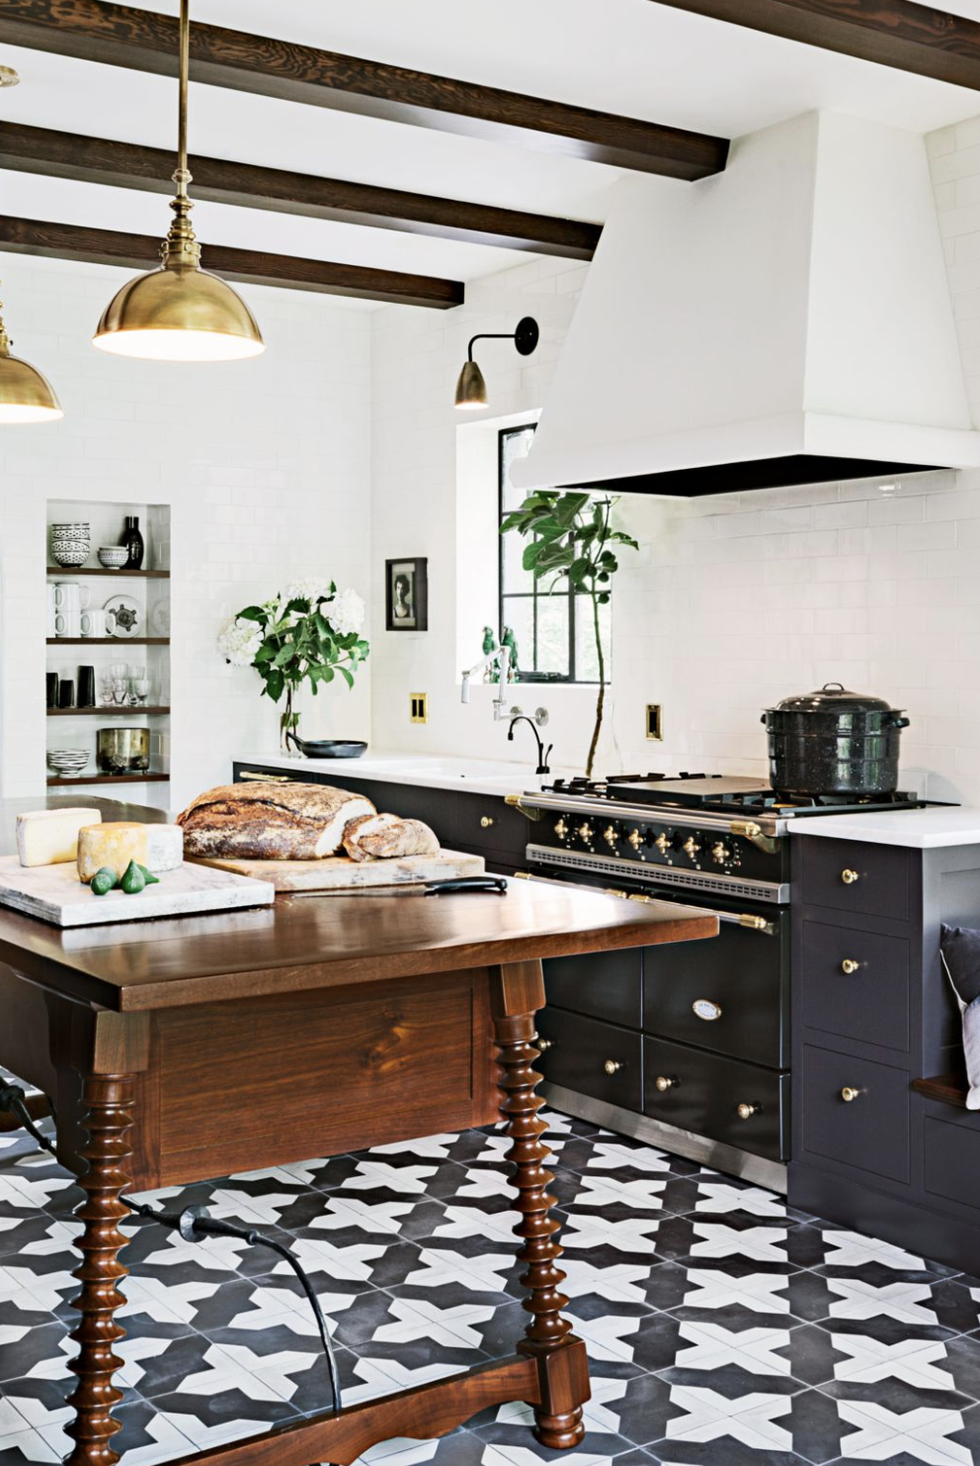 https://hips.hearstapps.com/hmg-prod/images/french-country-kitchen-ideas-lincoln-barbour-1649037272.png?crop=0.563xw:1.00xh;0,0&resize=980:*